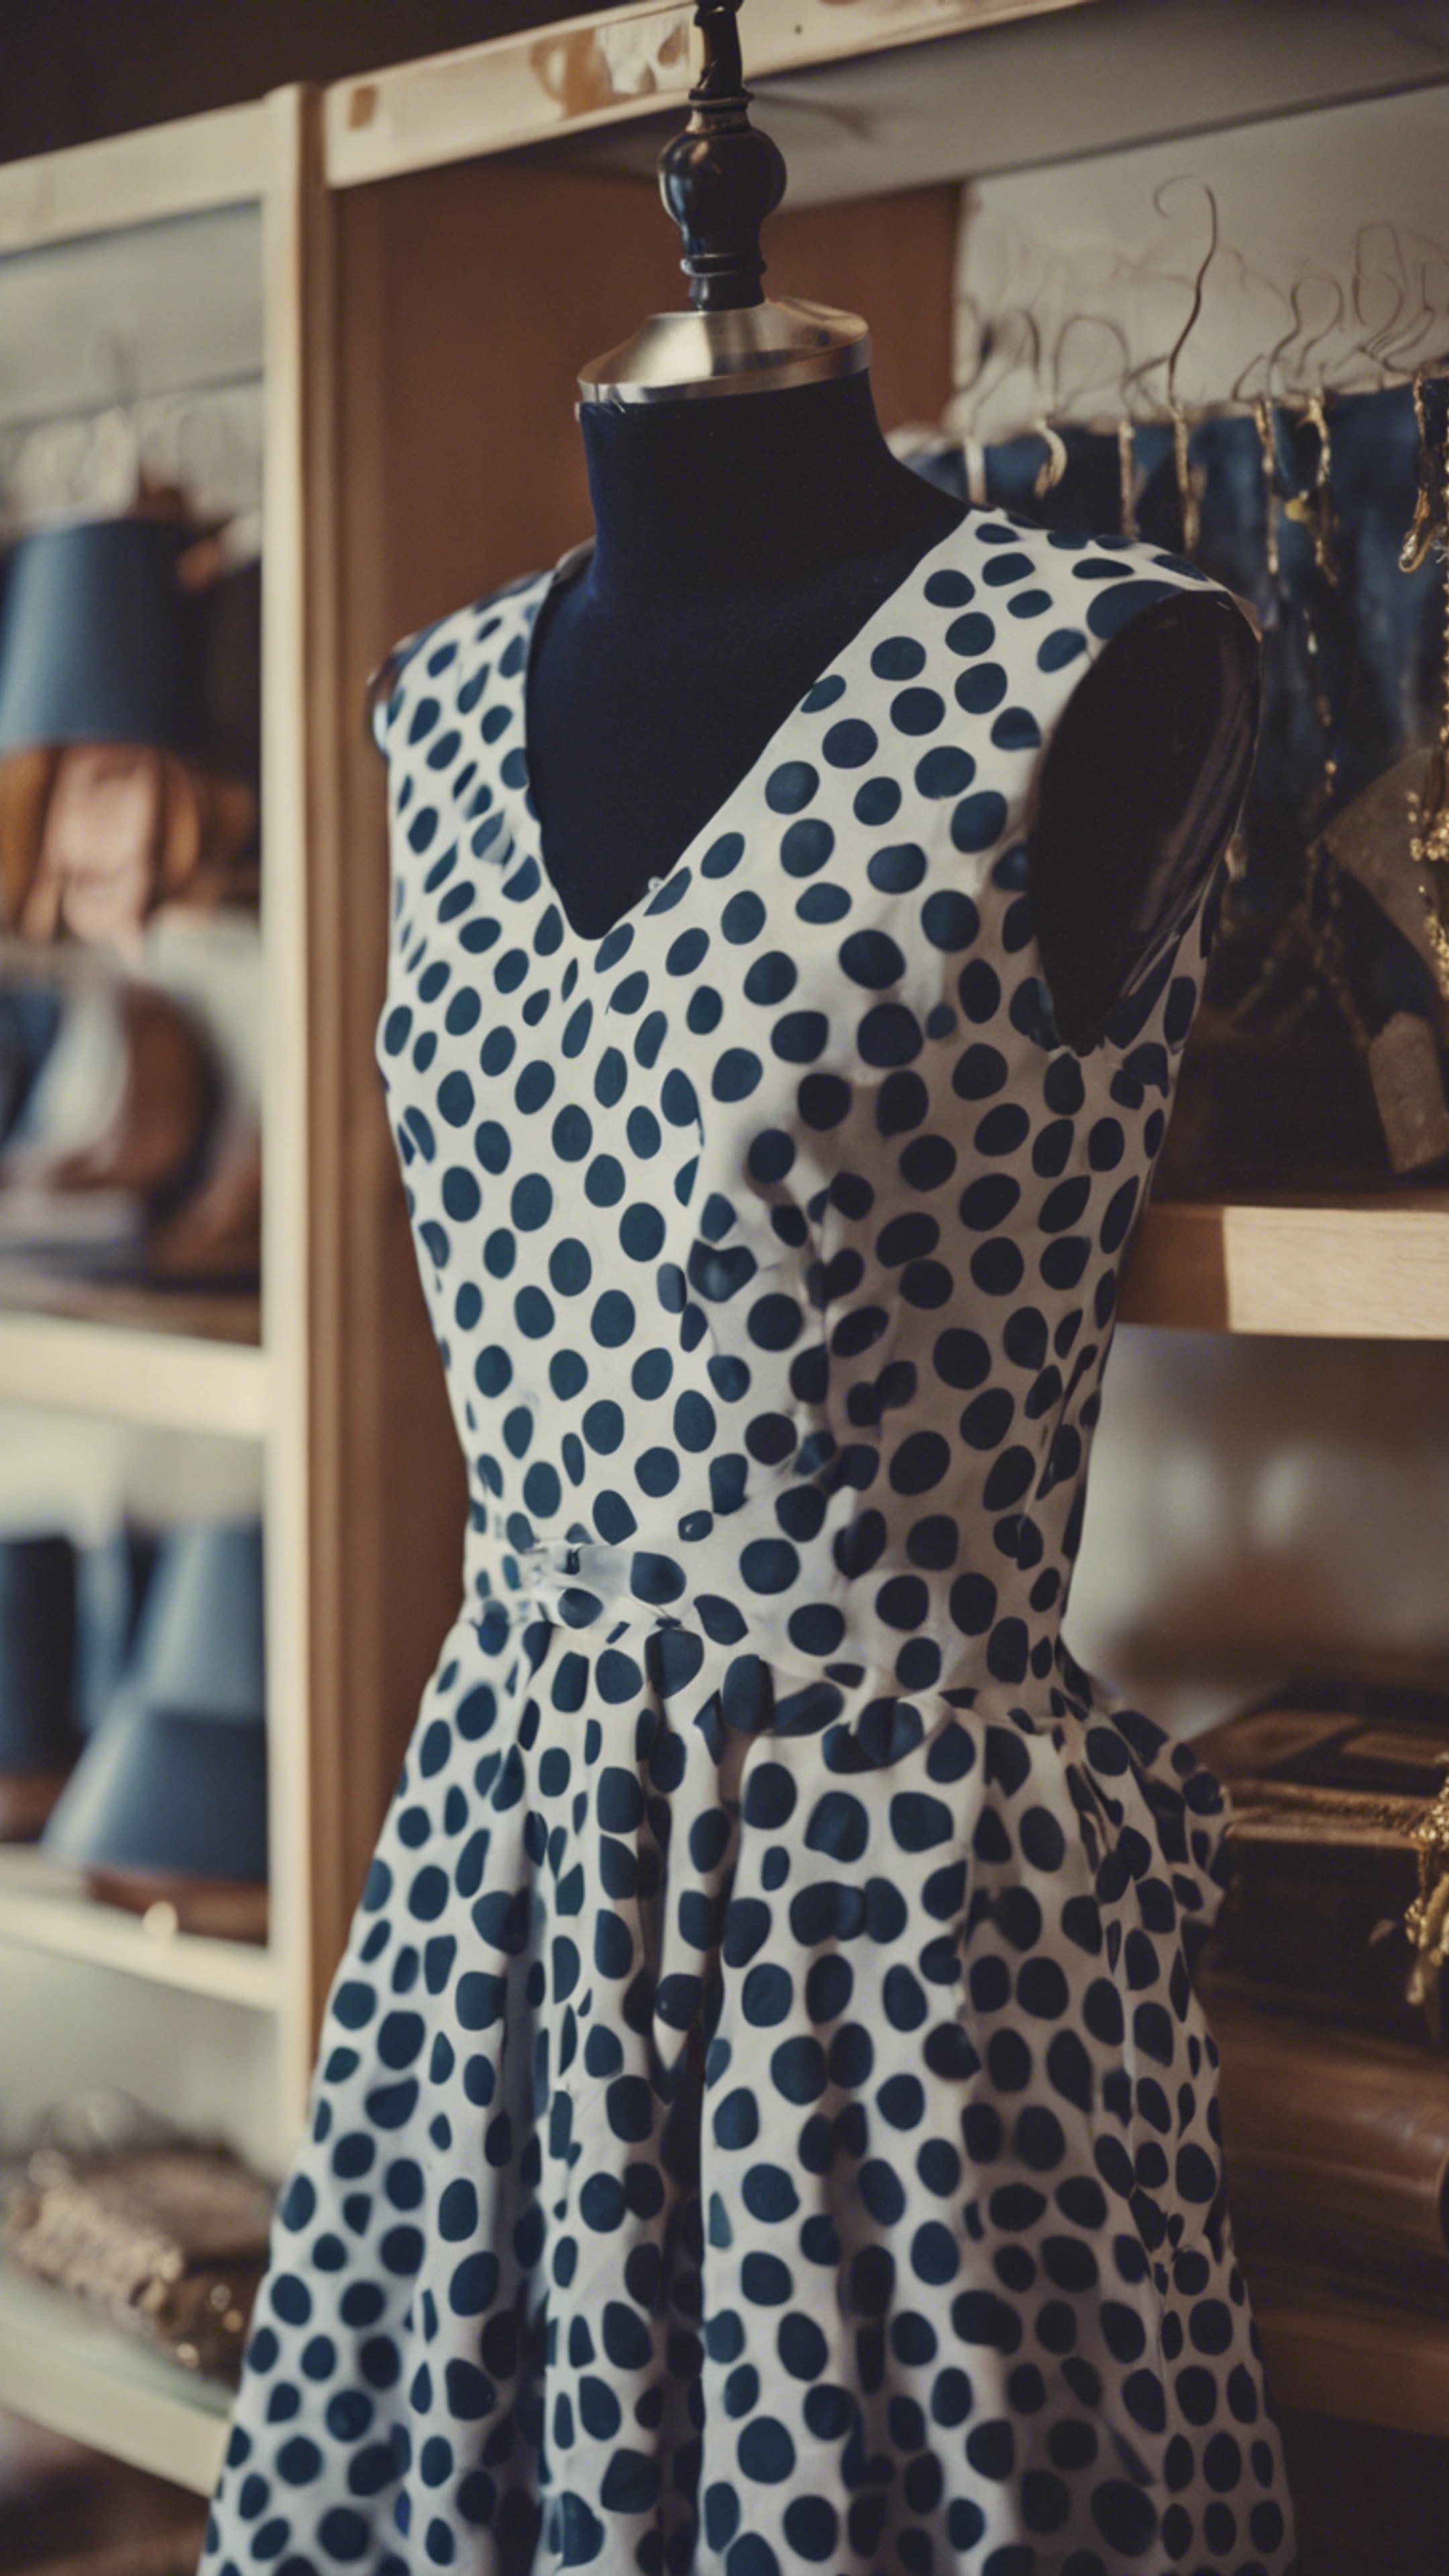 A classic 1960s navy polka dot dress hanging in a vintage boutique. Tapeta[089a5e0b63454d12a3db]